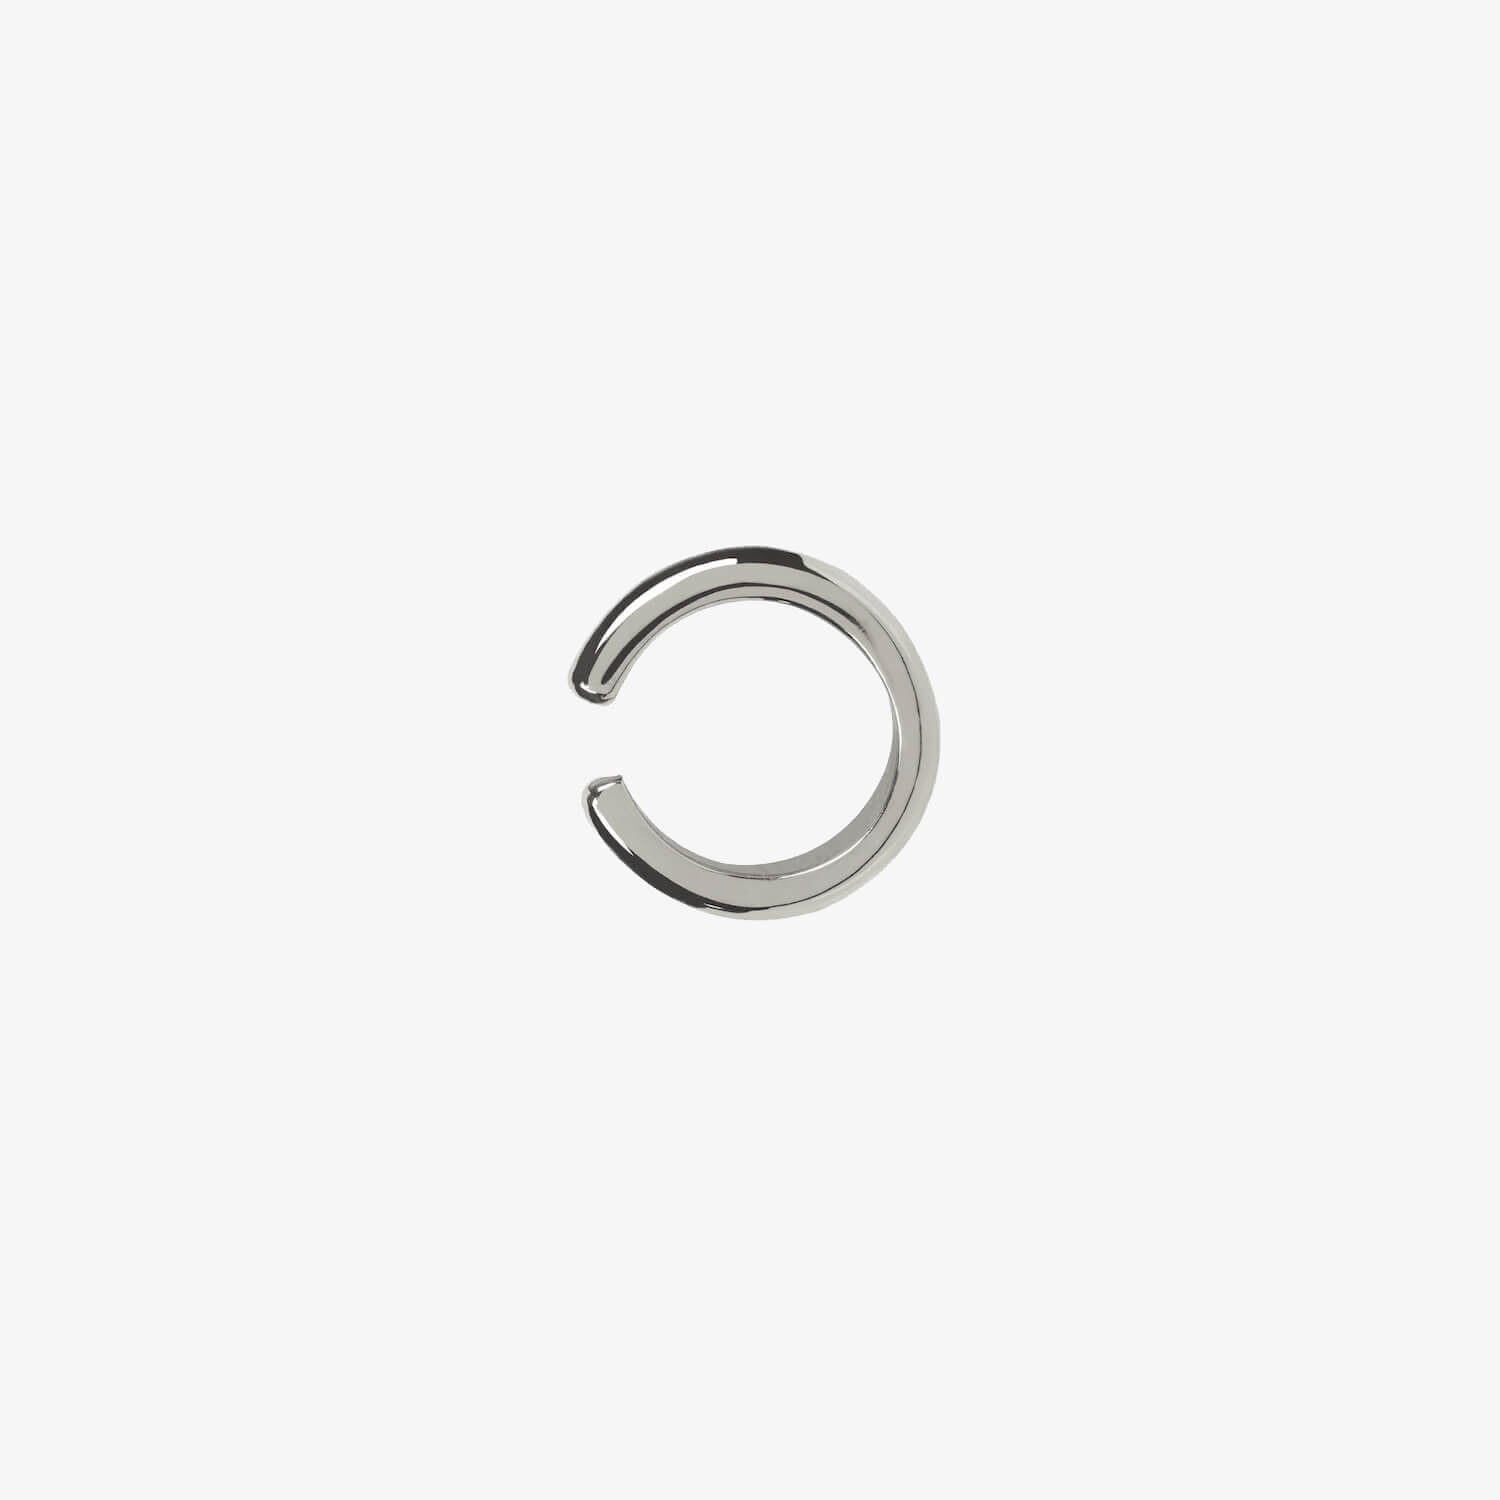 Small silver open ear cuff on white background